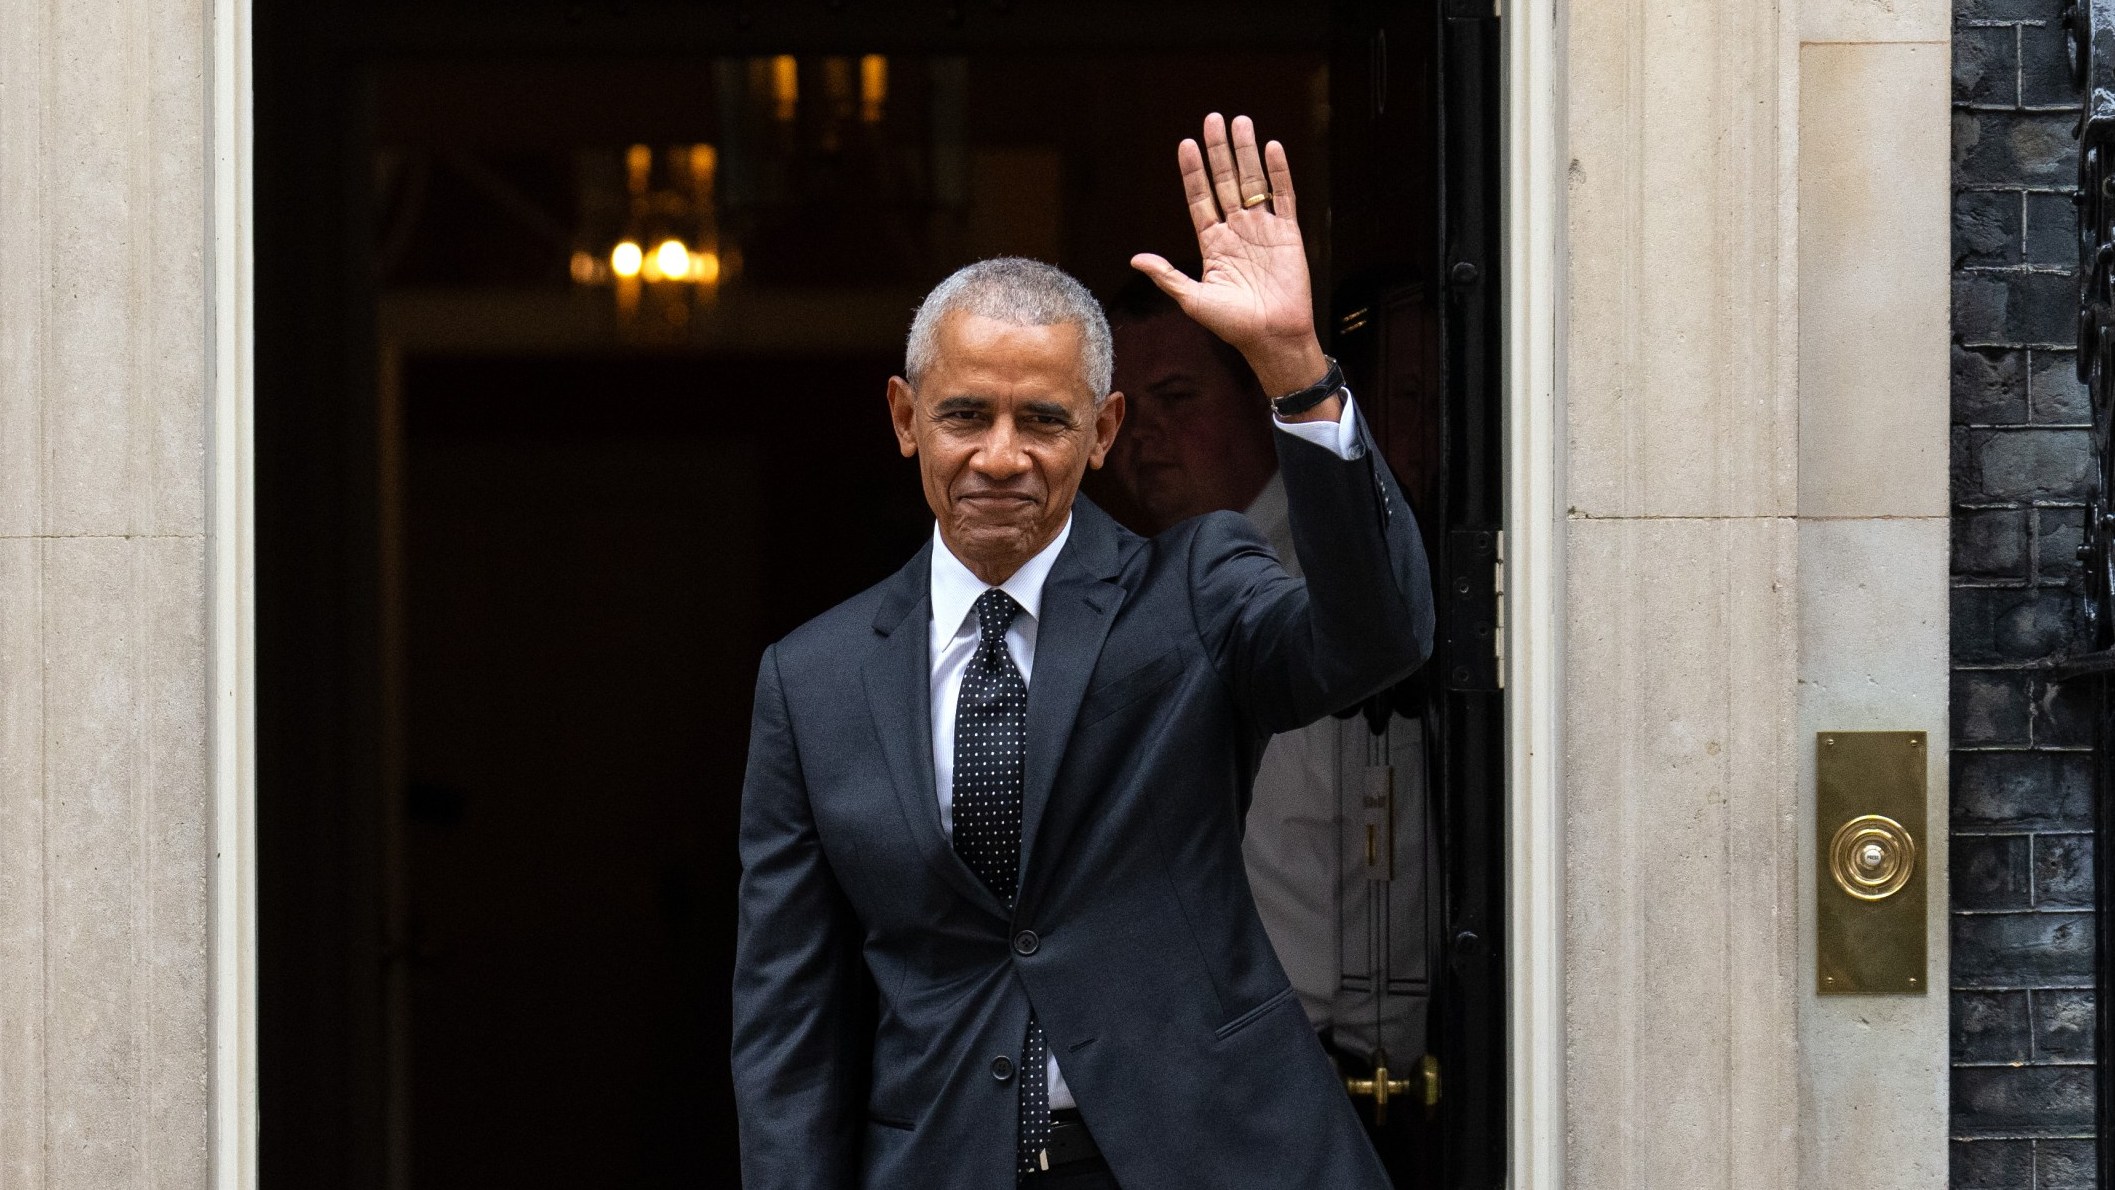 Obama drops into Downing Street for surprise meeting